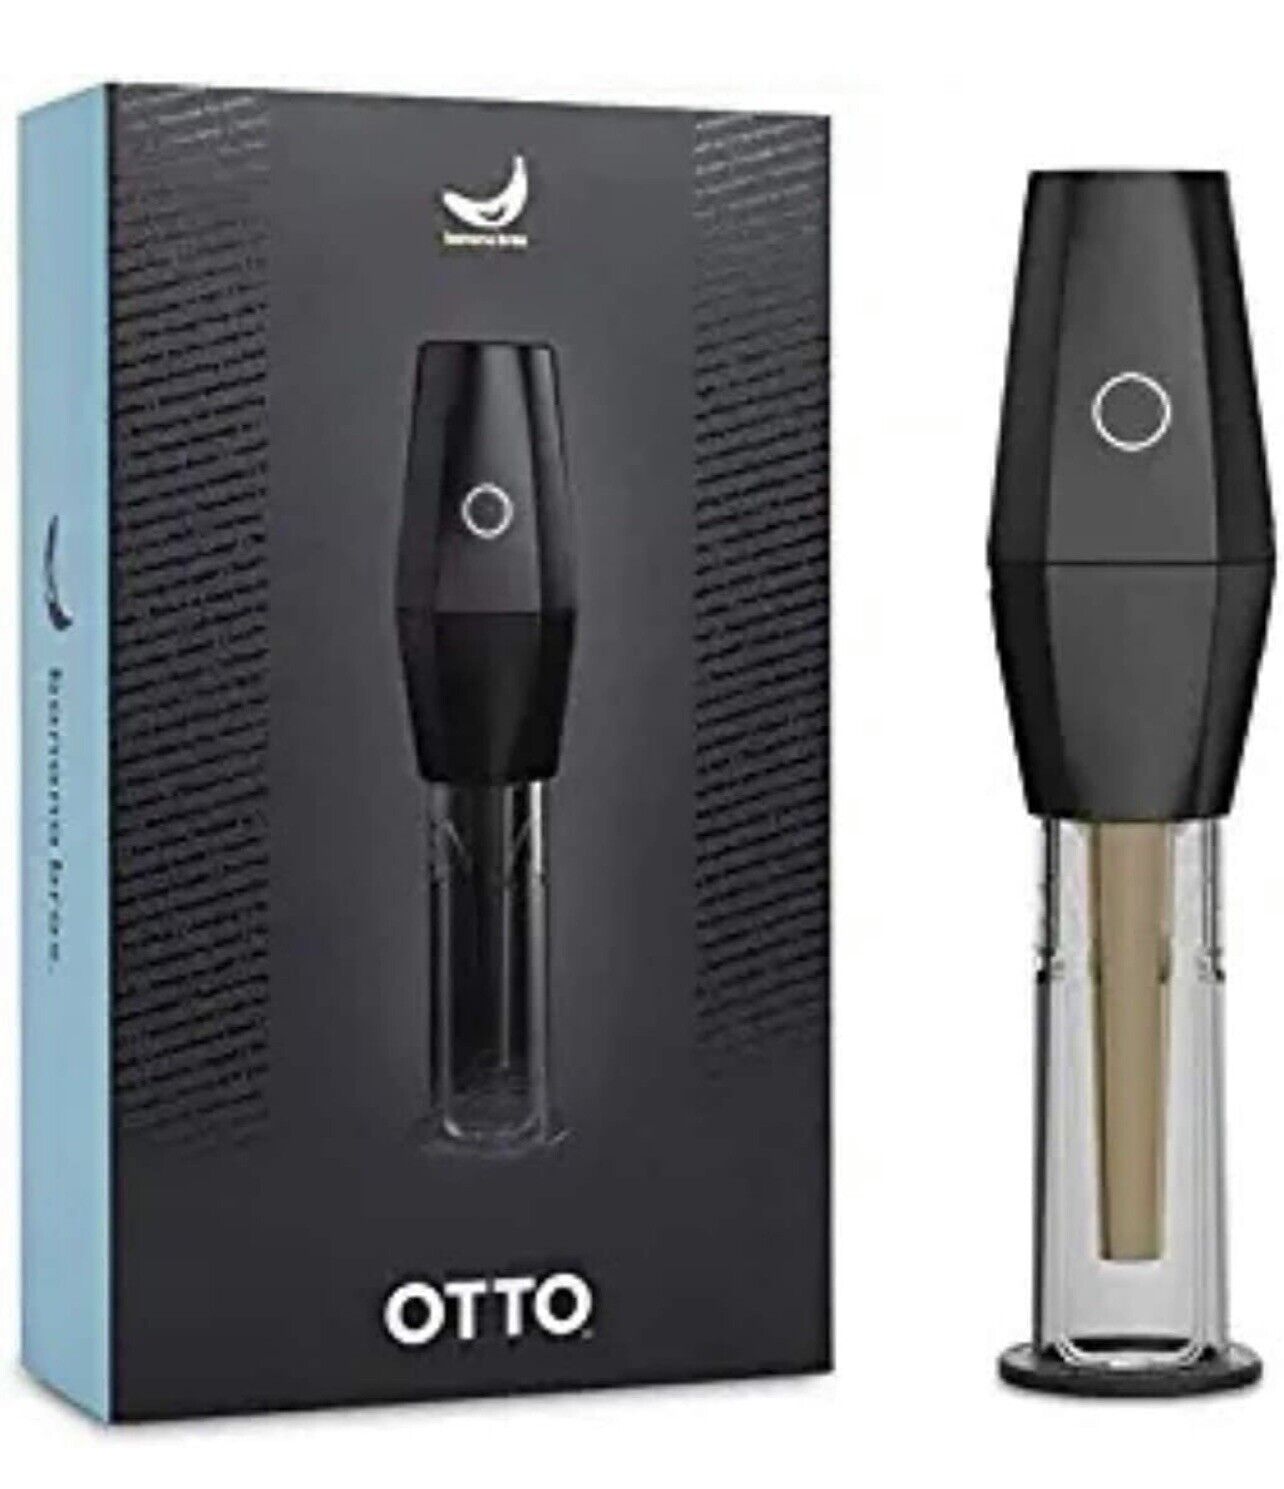 Electric Smart Herb and Spice Grinder - OTTO by Banana Bros Brand New